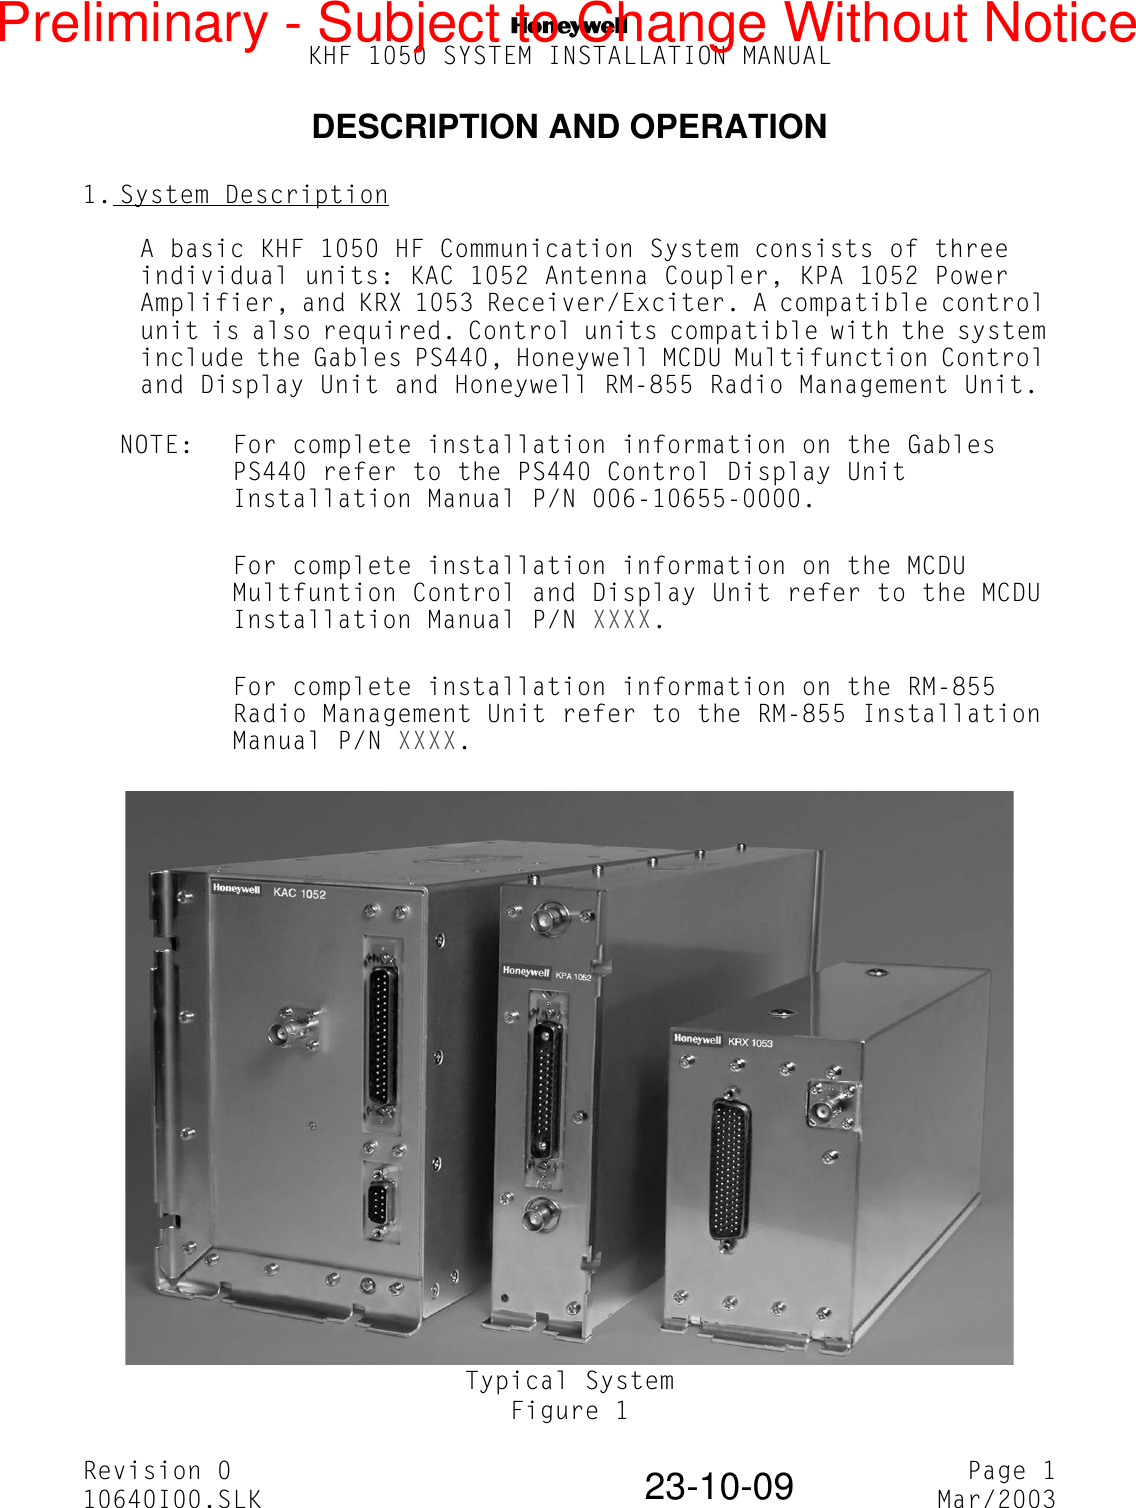 NKHF 1050 SYSTEM INSTALLATION MANUALRevision 0 Page 110640I00.SLK Mar/200323-10-09DESCRIPTION AND OPERATION1. System DescriptionA basic KHF 1050 HF Communication System consists of three individual units: KAC 1052 Antenna Coupler, KPA 1052 Power Amplifier, and KRX 1053 Receiver/Exciter. A compatible control unit is also required. Control units compatible with the system include the Gables PS440, Honeywell MCDU Multifunction Control and Display Unit and Honeywell RM-855 Radio Management Unit.NOTE: For complete installation information on the Gables PS440 refer to the PS440 Control Display Unit Installation Manual P/N 006-10655-0000.For complete installation information on the MCDU Multfuntion Control and Display Unit refer to the MCDU Installation Manual P/N XXXX.For complete installation information on the RM-855 Radio Management Unit refer to the RM-855 Installation Manual P/N XXXX.Typical SystemFigure 1Preliminary - Subject to Change Without Notice